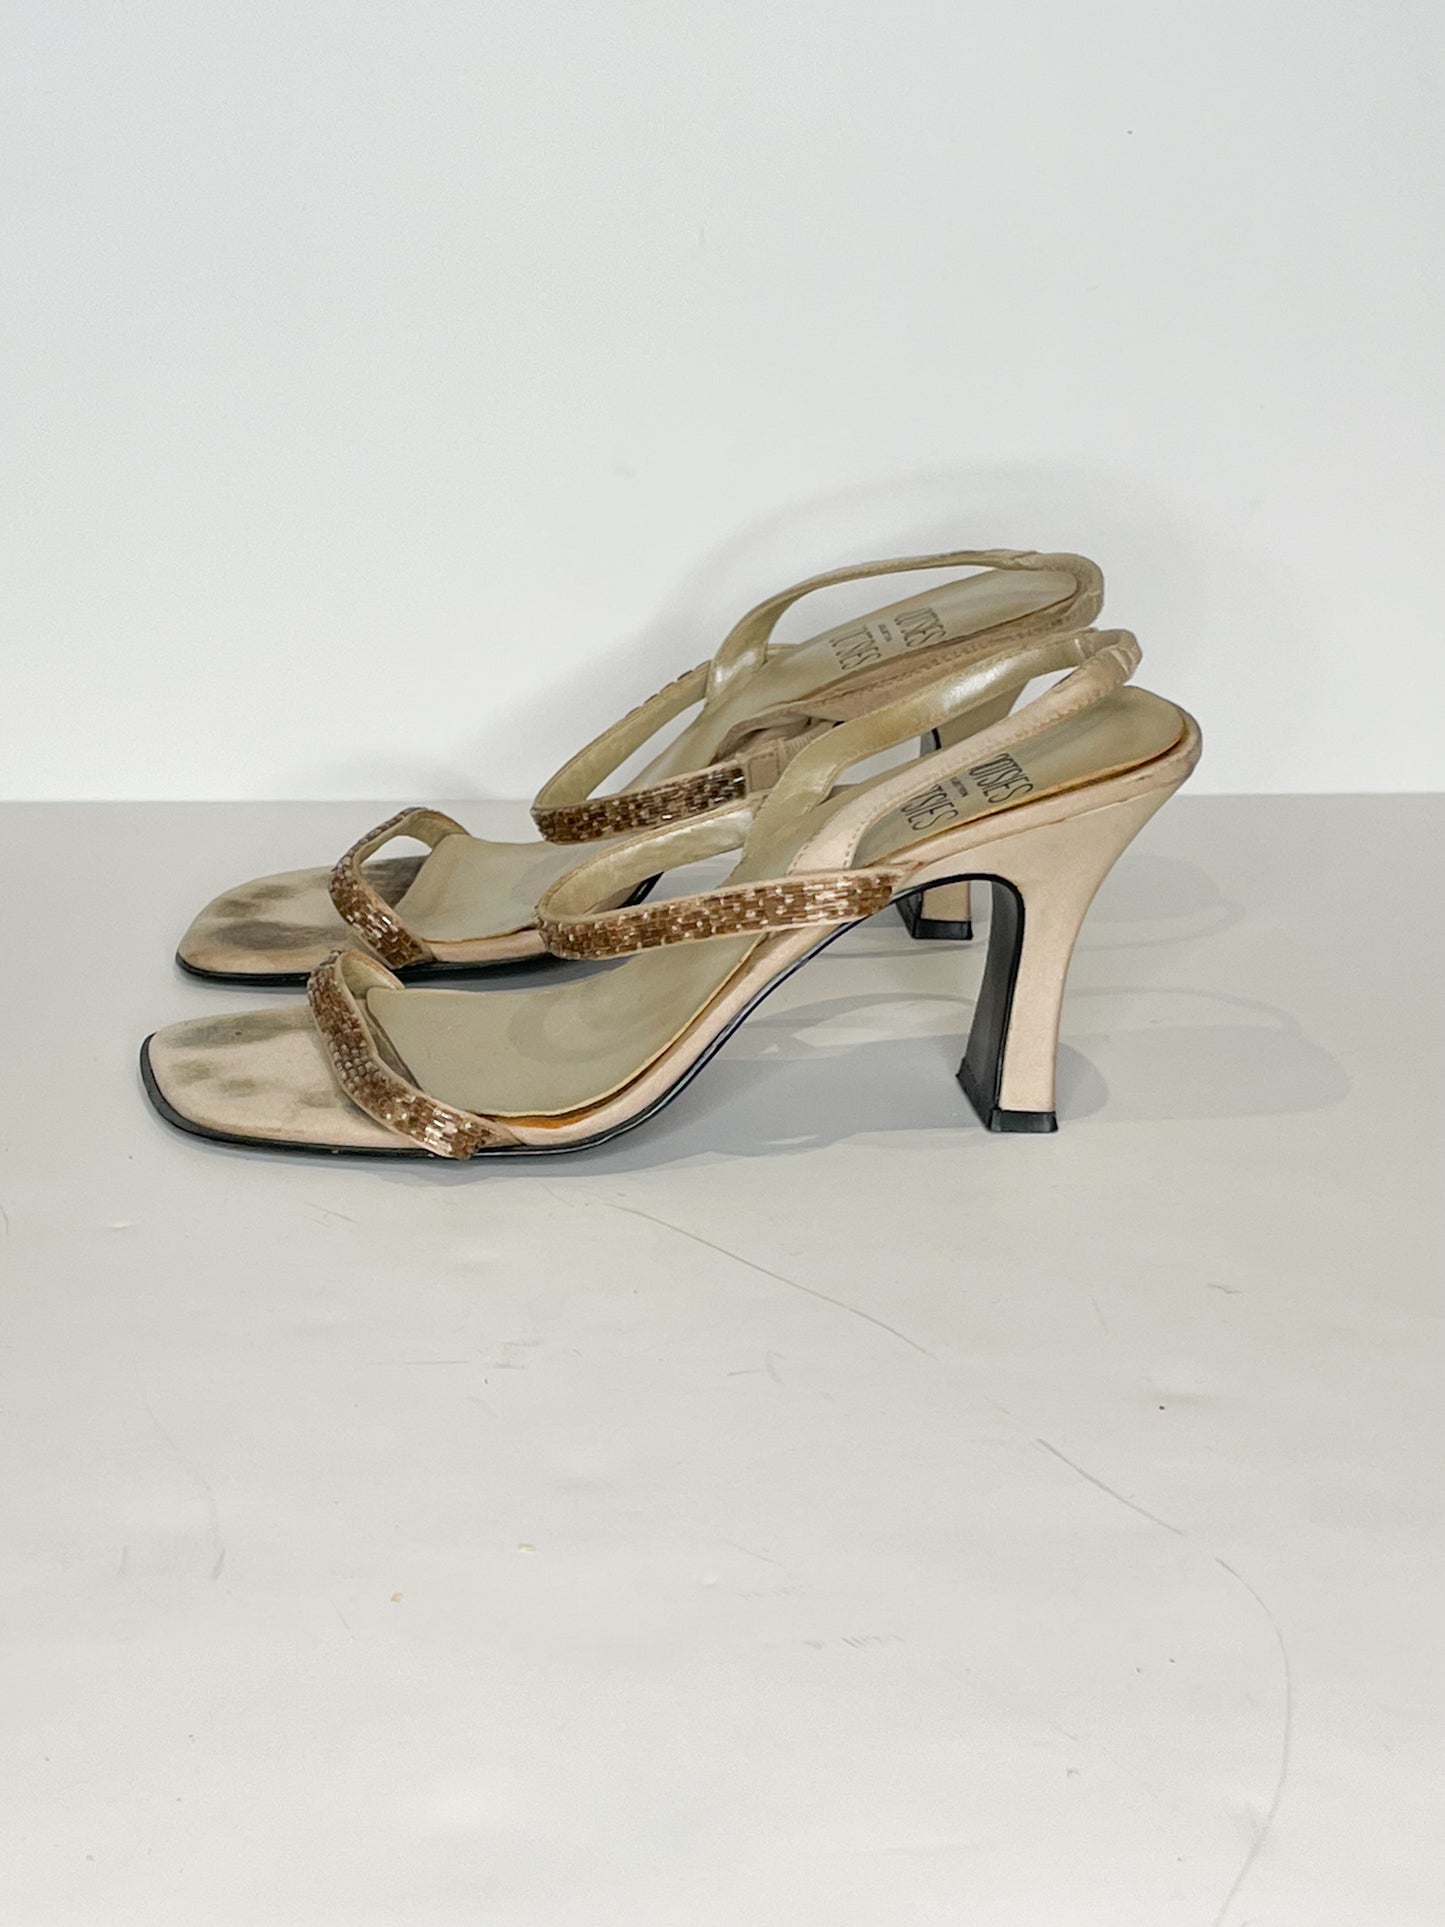 Mootsies Tootsies Soft Gold Satin Strappy Square Toe 3.25" Heels - Size 6.5